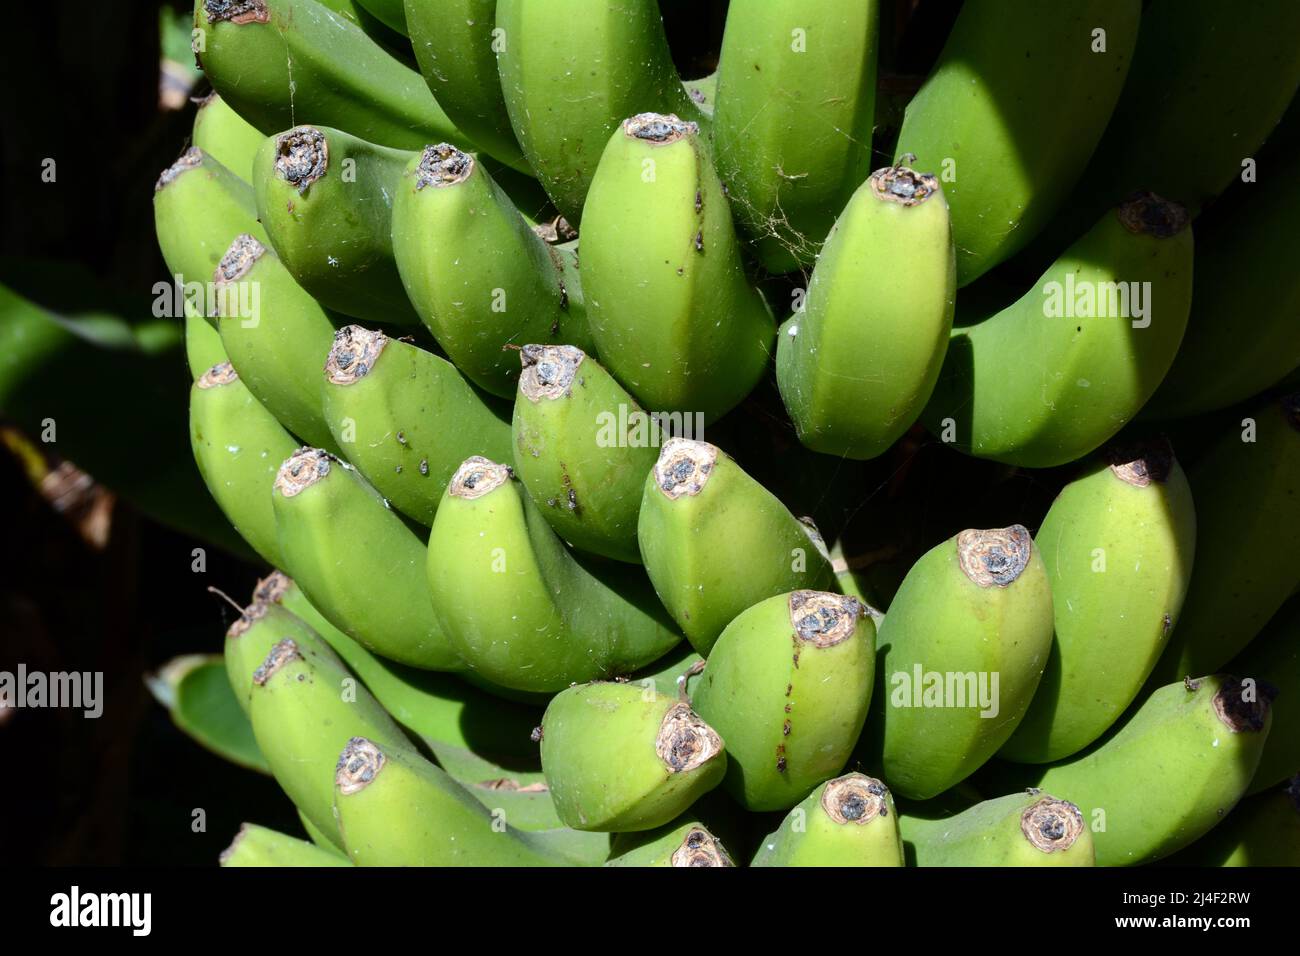 A bunch of unripe Canarian bananas growing on tree on a farm, or finca, in the area of Los Realejos, on the island of Tenerife, Canary Islands, Spain. Stock Photo